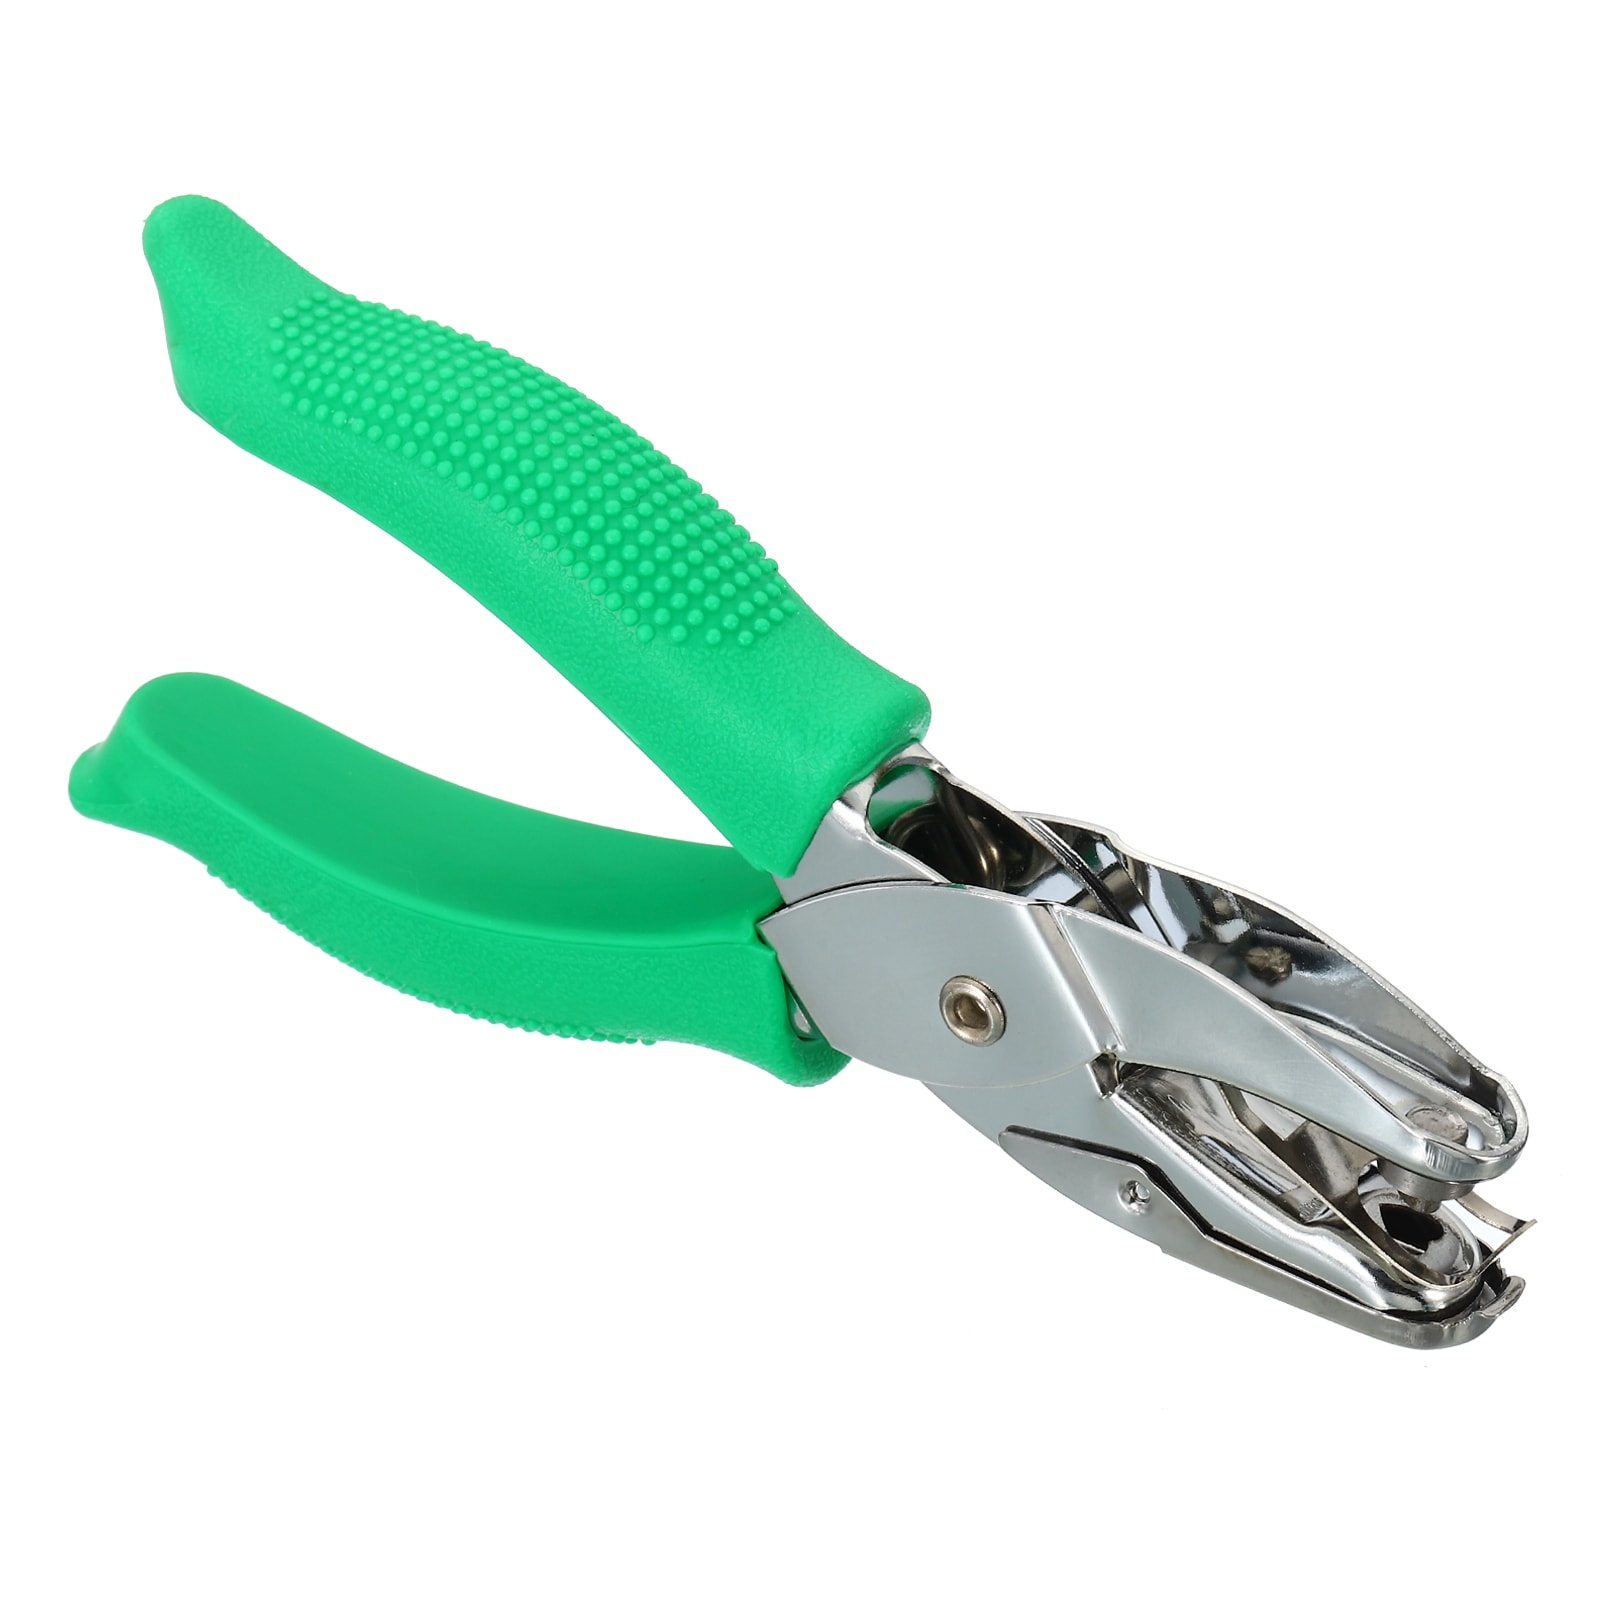 1/4 Single Hole Punch Handheld Hole Puncher with Soft Grip Heart Shape,  Green - Bed Bath & Beyond - 37683247